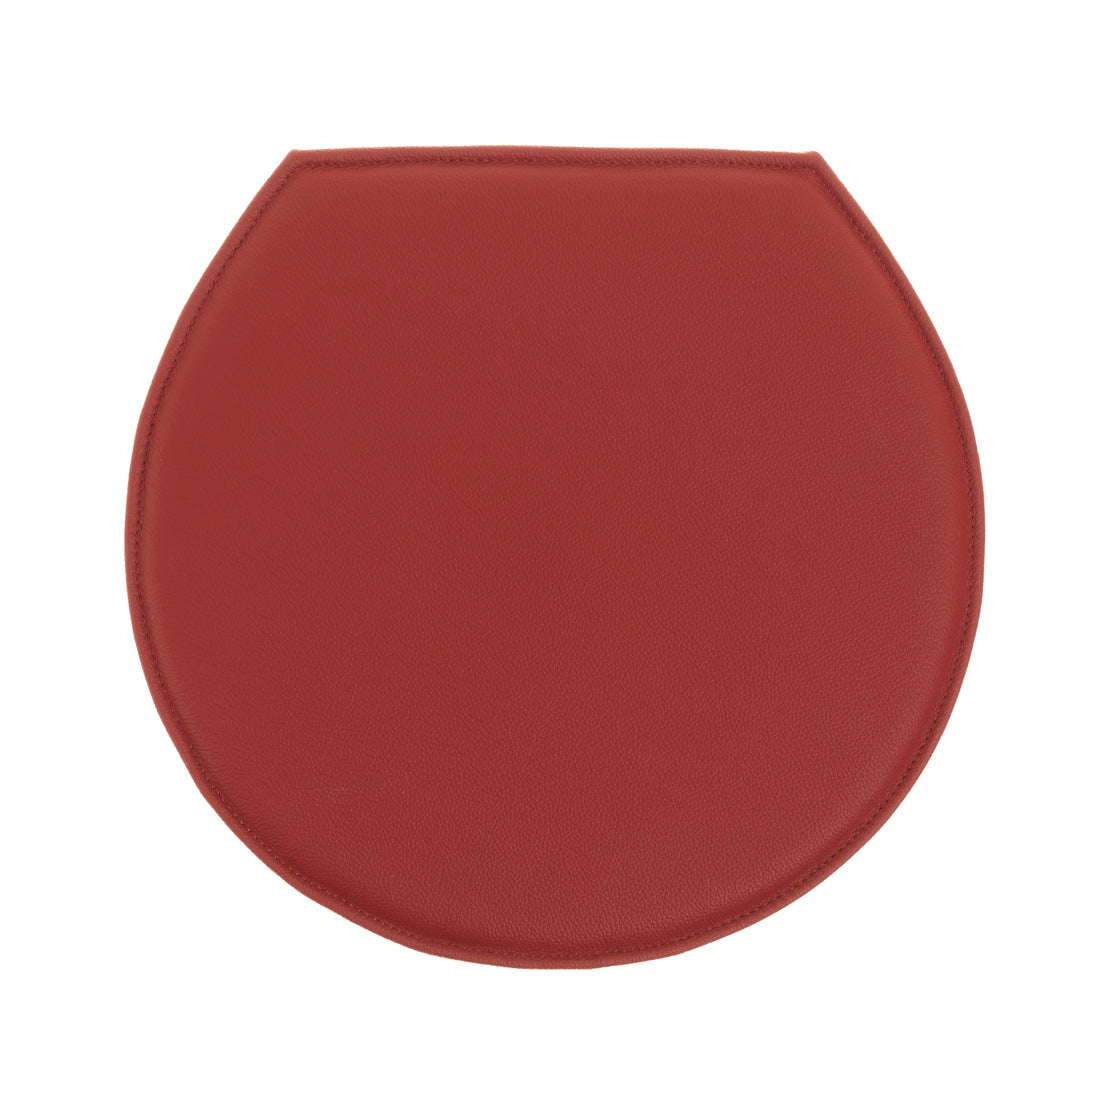 Luxury cushion to Arne Jacobsen ant (3100 + 3101) in red leather